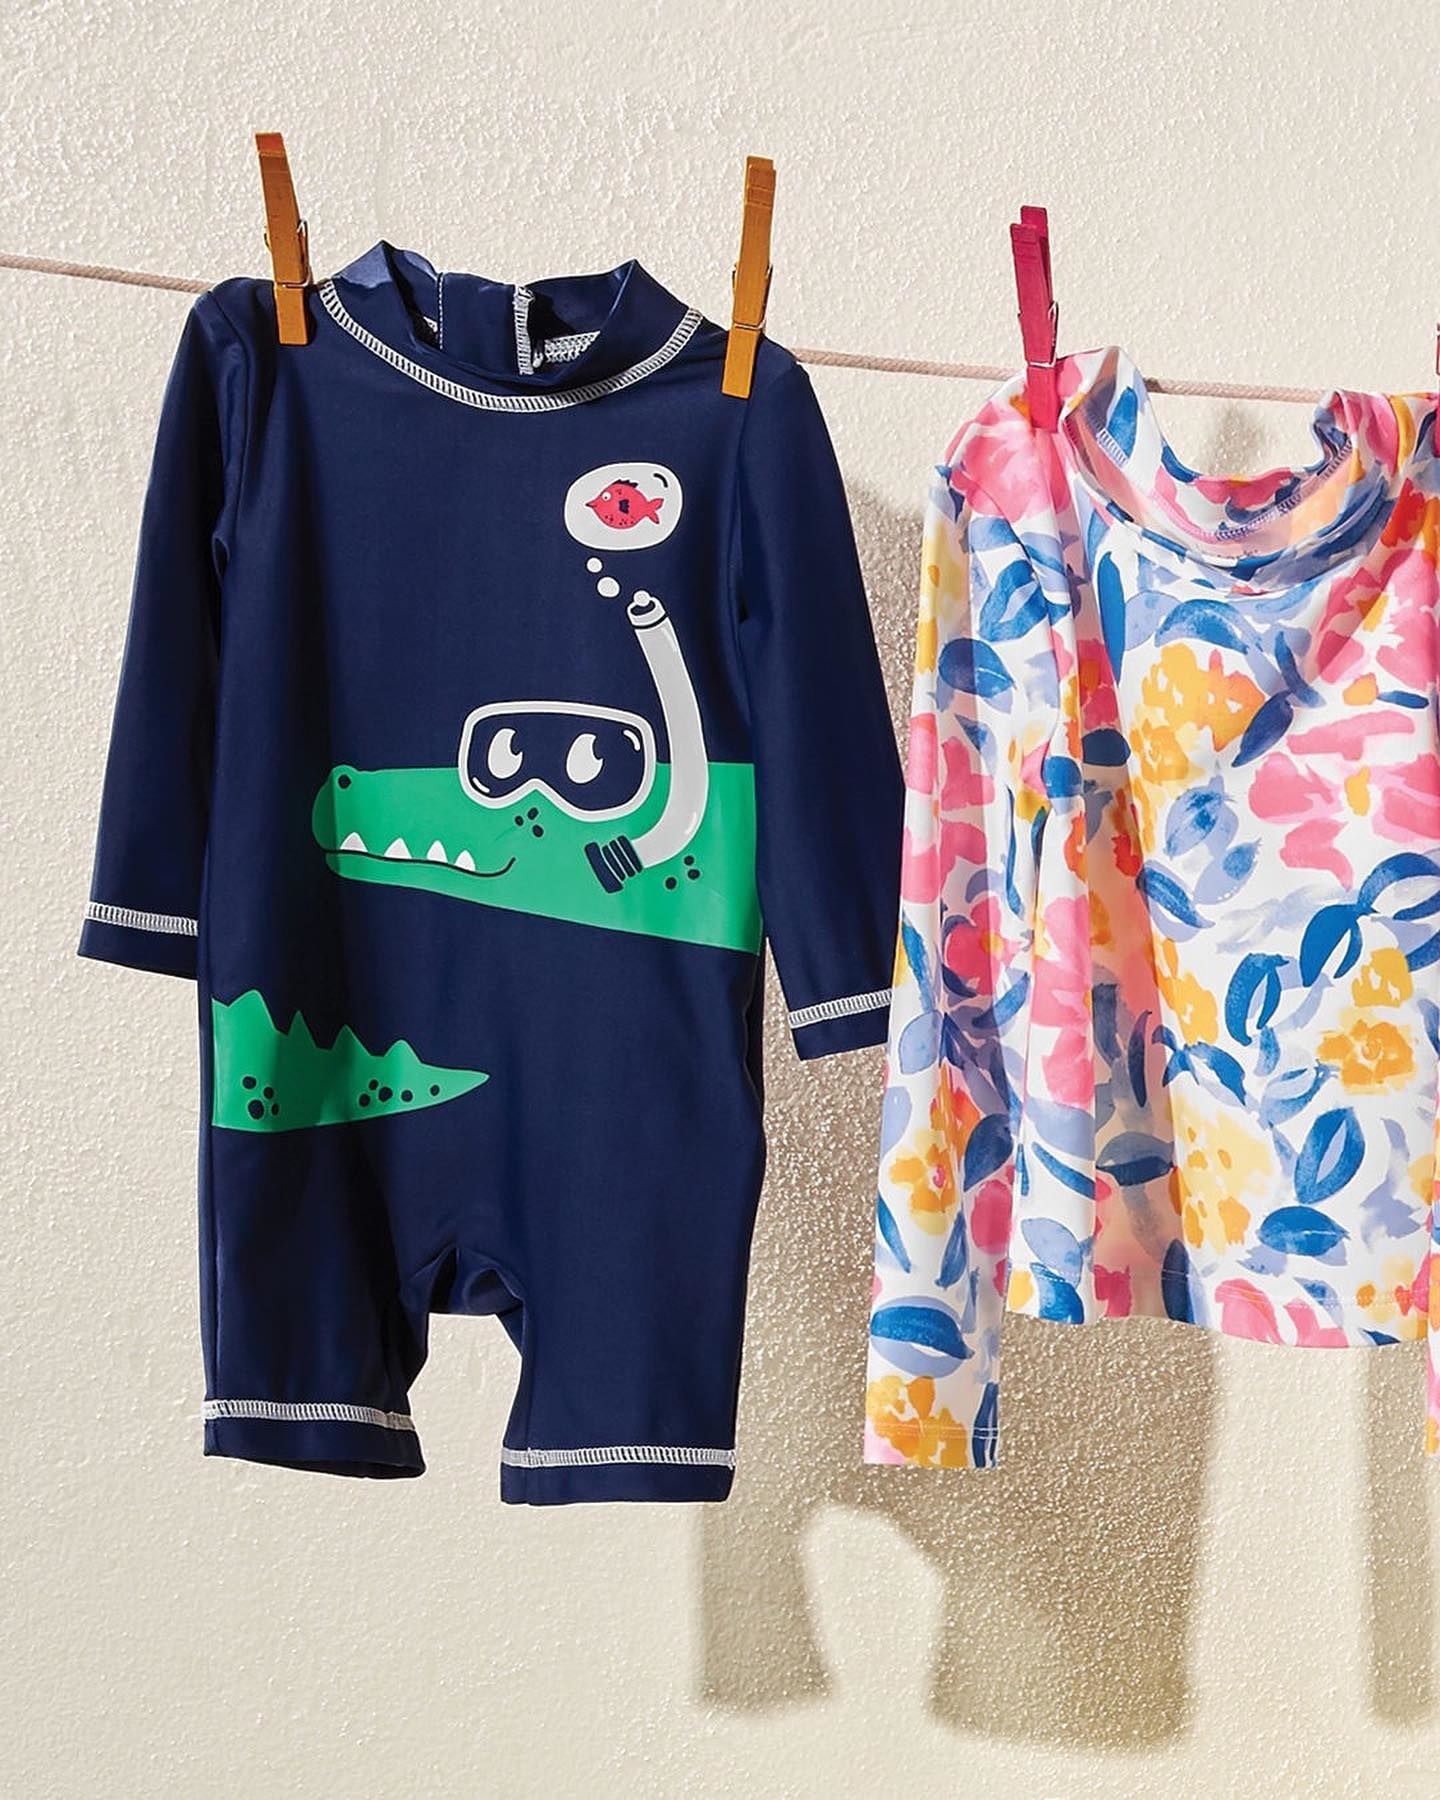 a one-piece navy blue rashguard with a scuba diving alligator on it